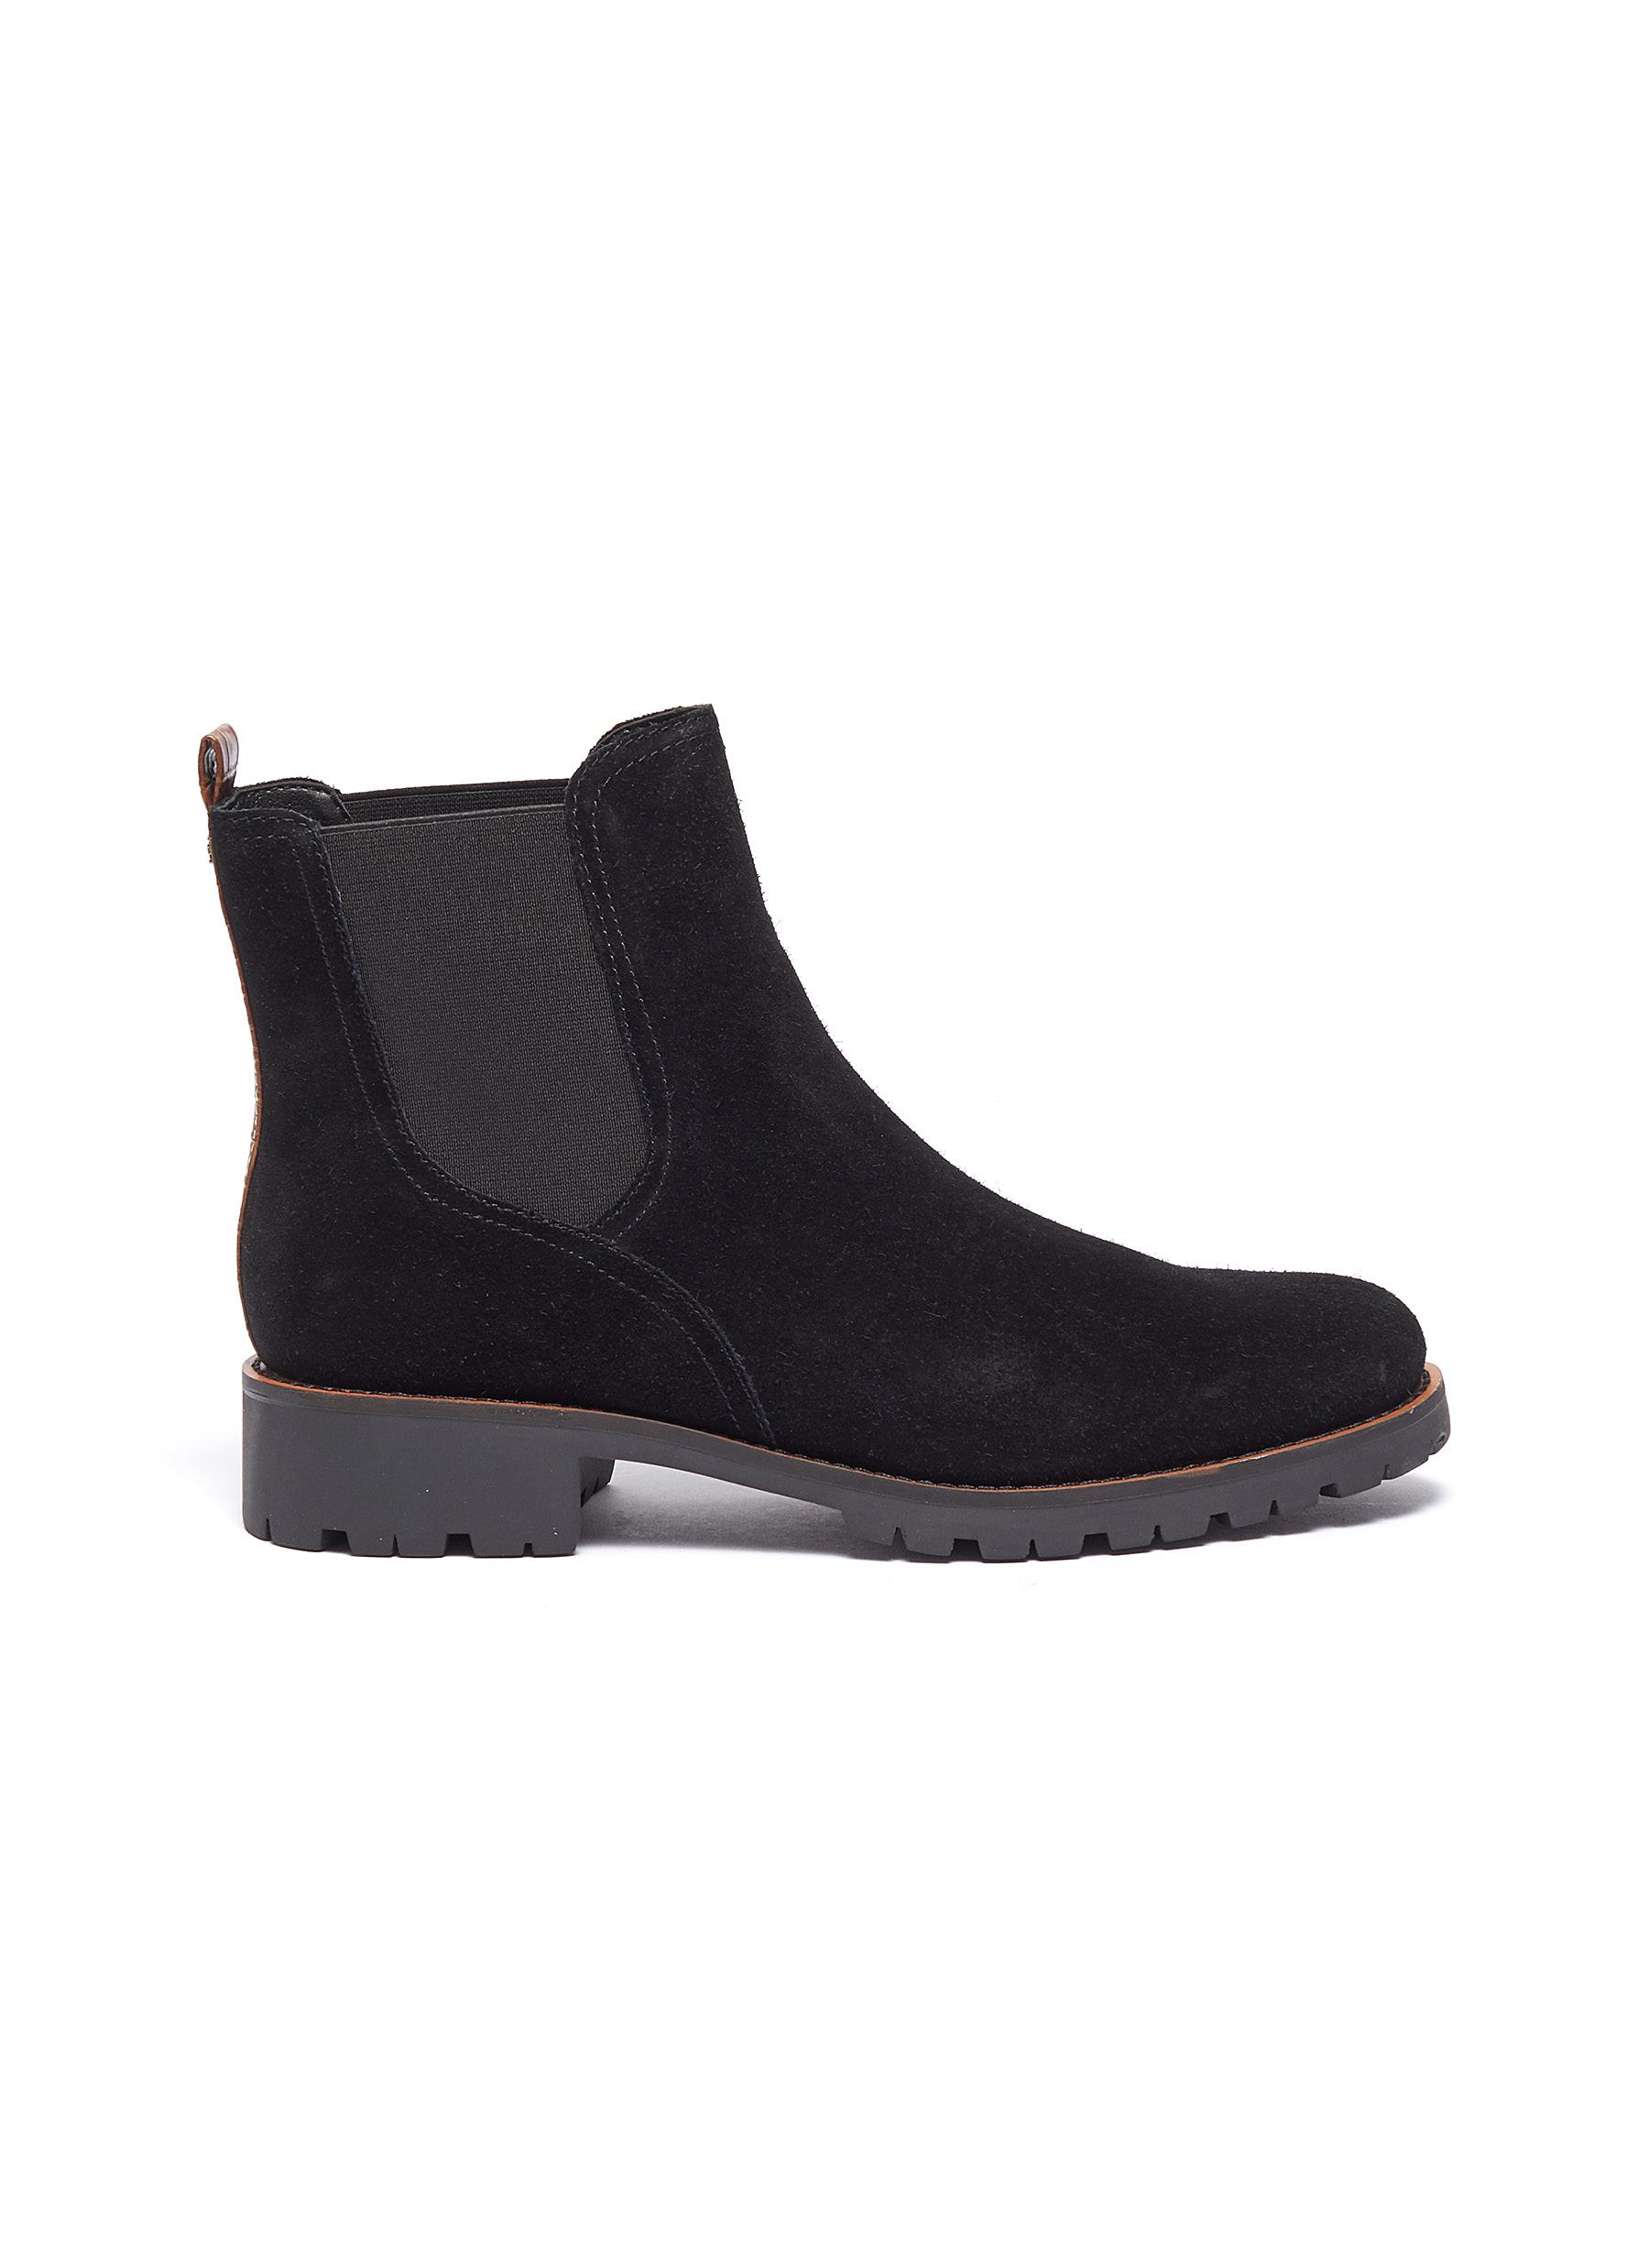 Jaclyn suede Chelsea boots by Sam Edelman